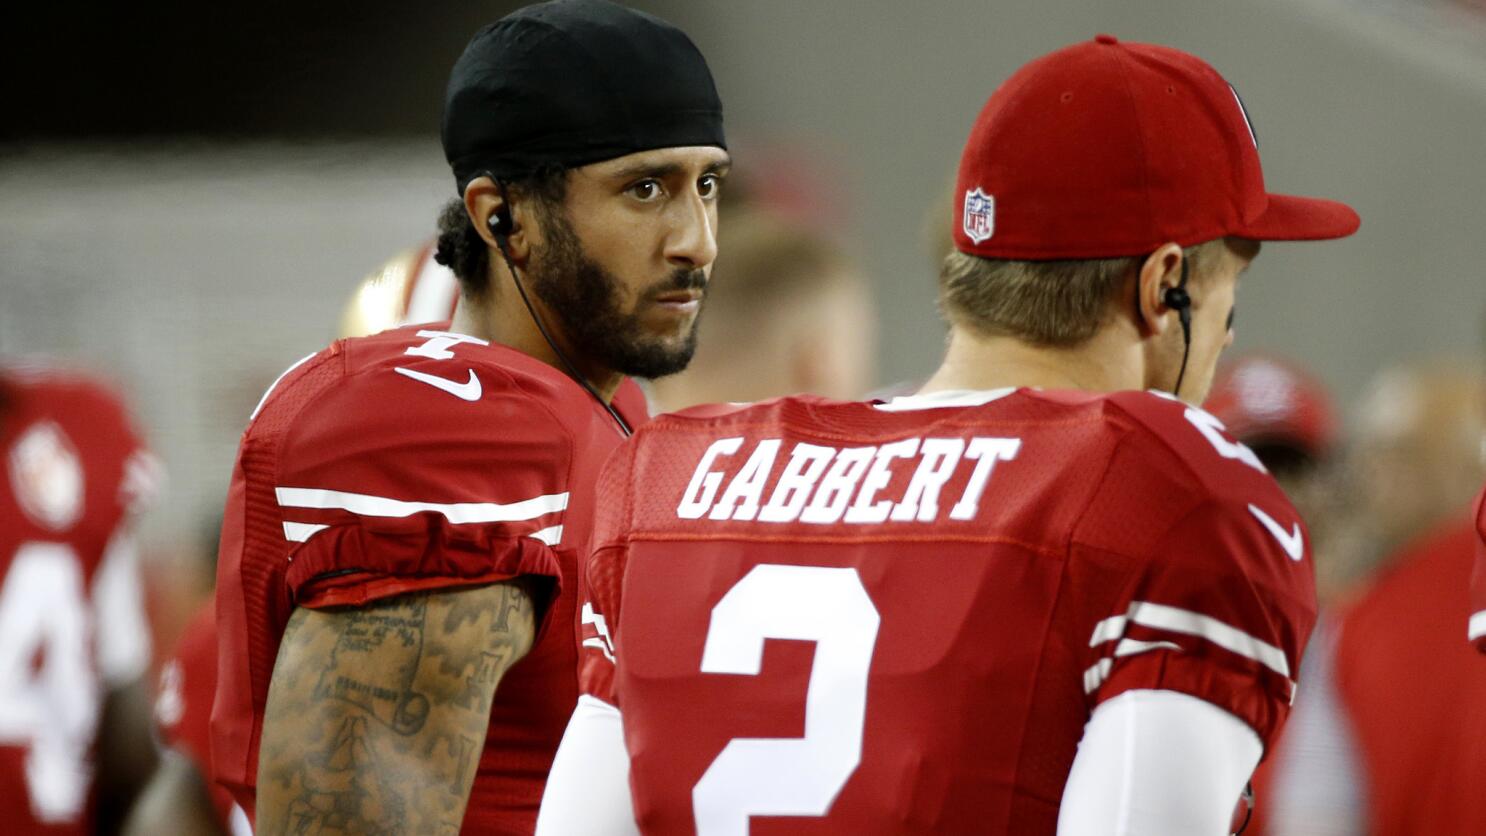 49ers' Colin Kaepernick: 'I'll continue to sit' for national anthem